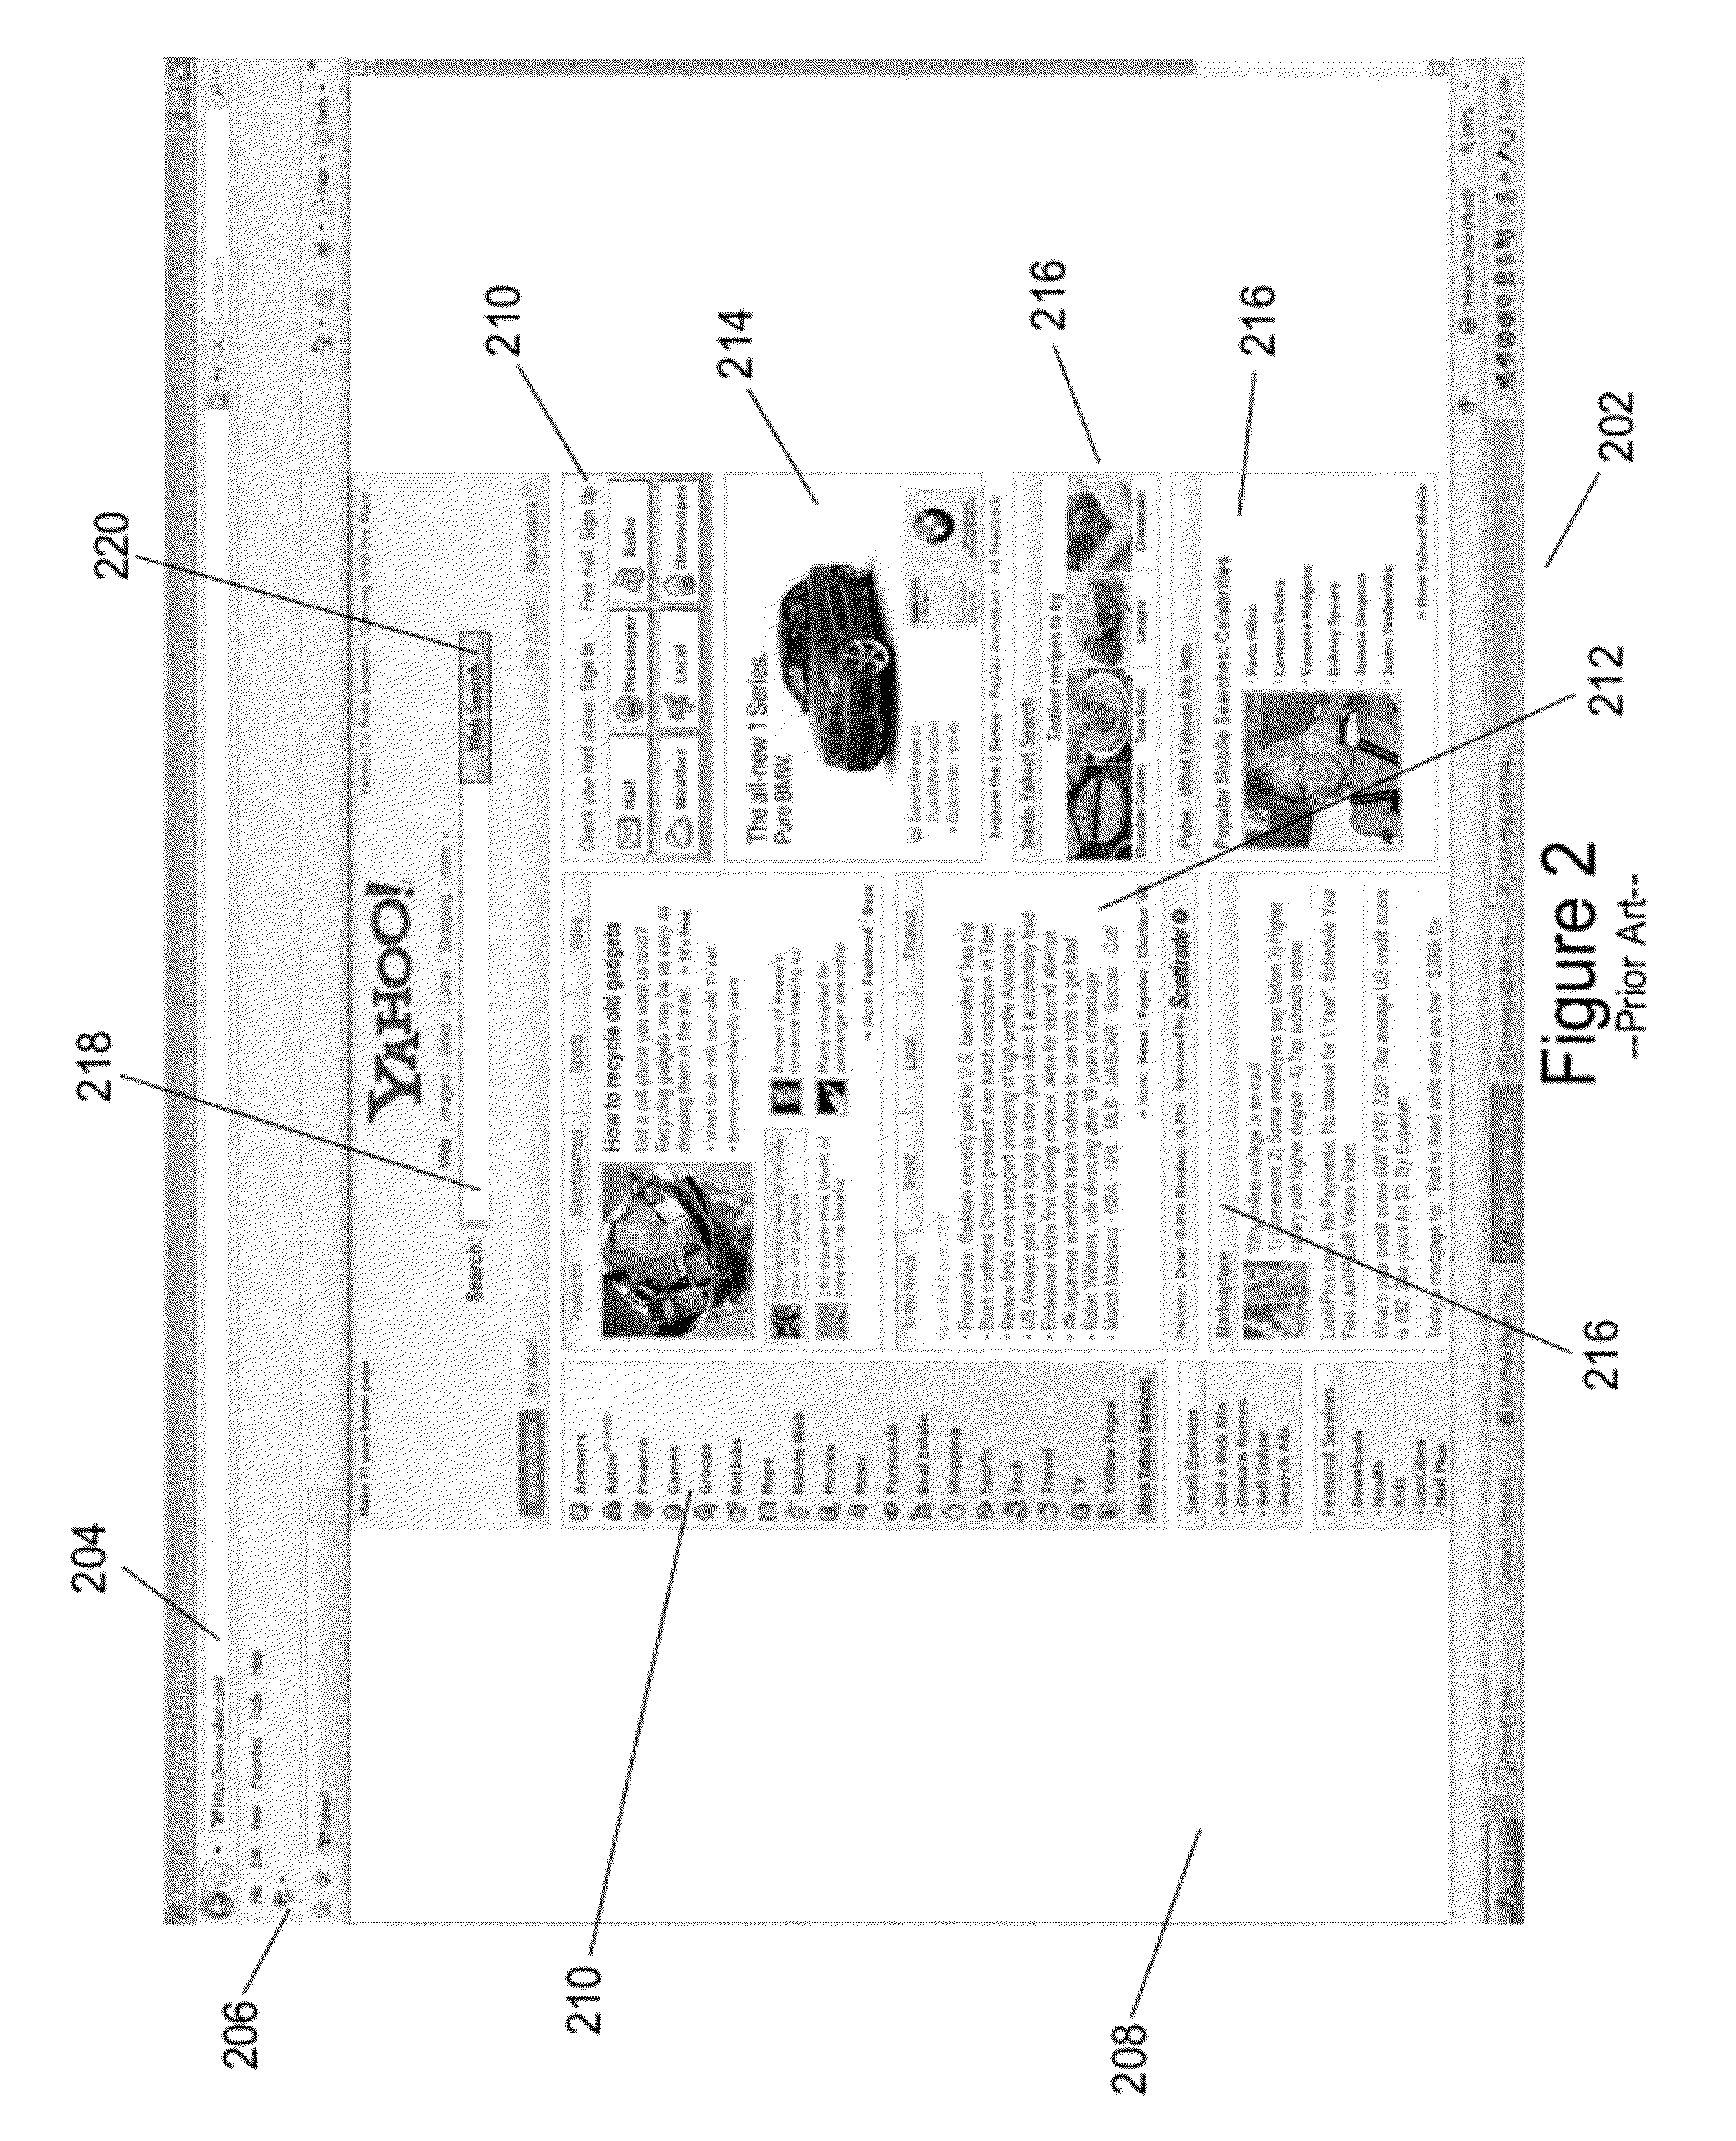 Method and System for Automated Search for, and Retrieval and Distribution of, Information